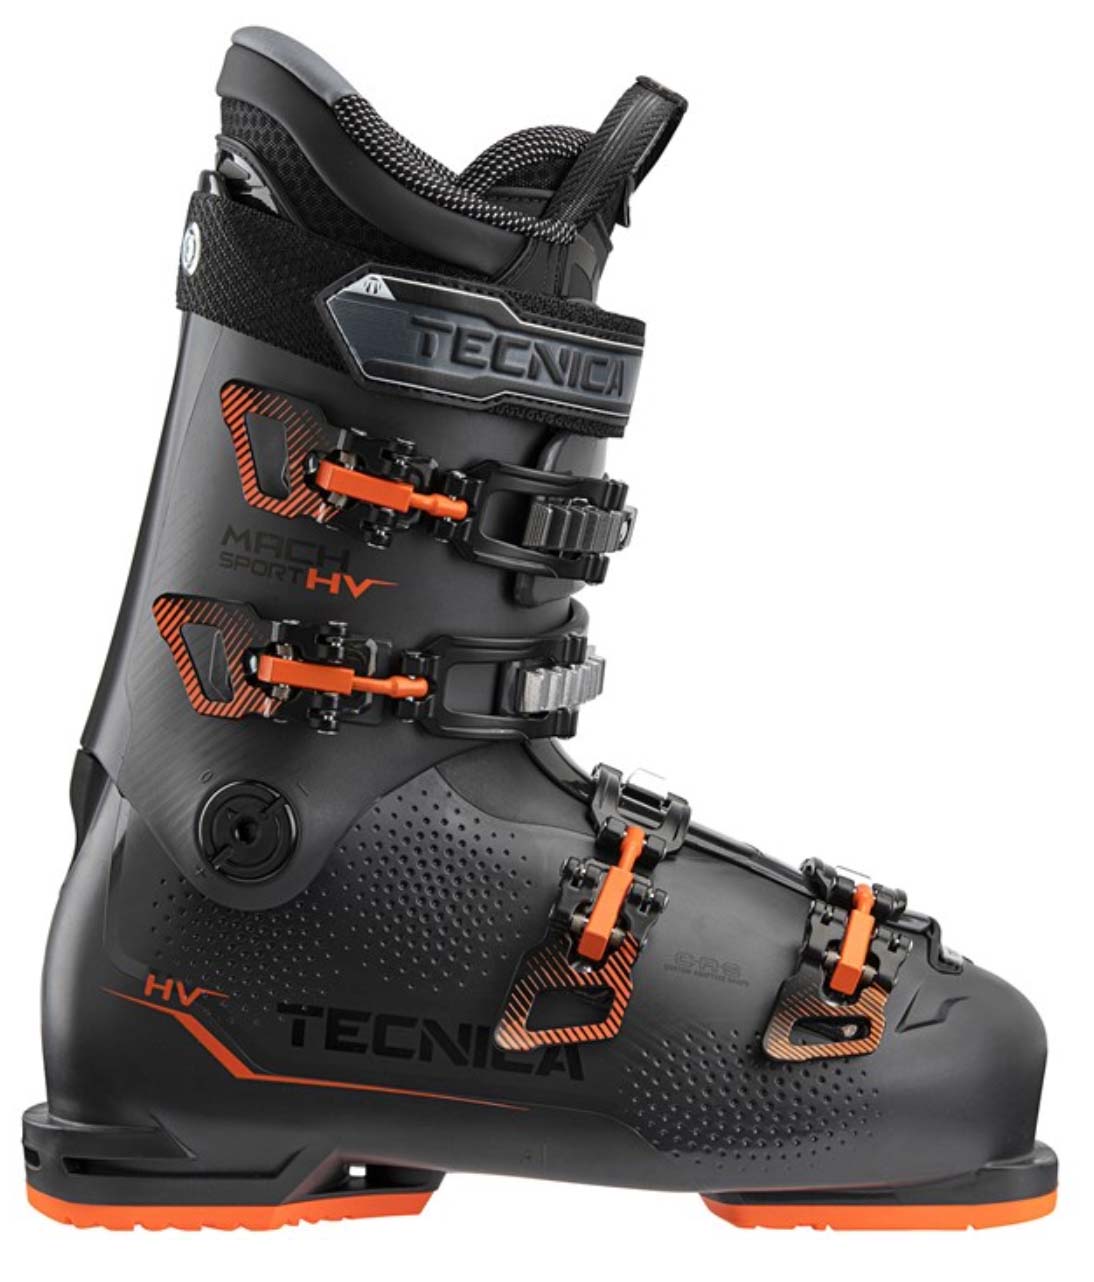 Atomic expert/race ski boot power strap replacement MATCHING pair one left 1 rt 